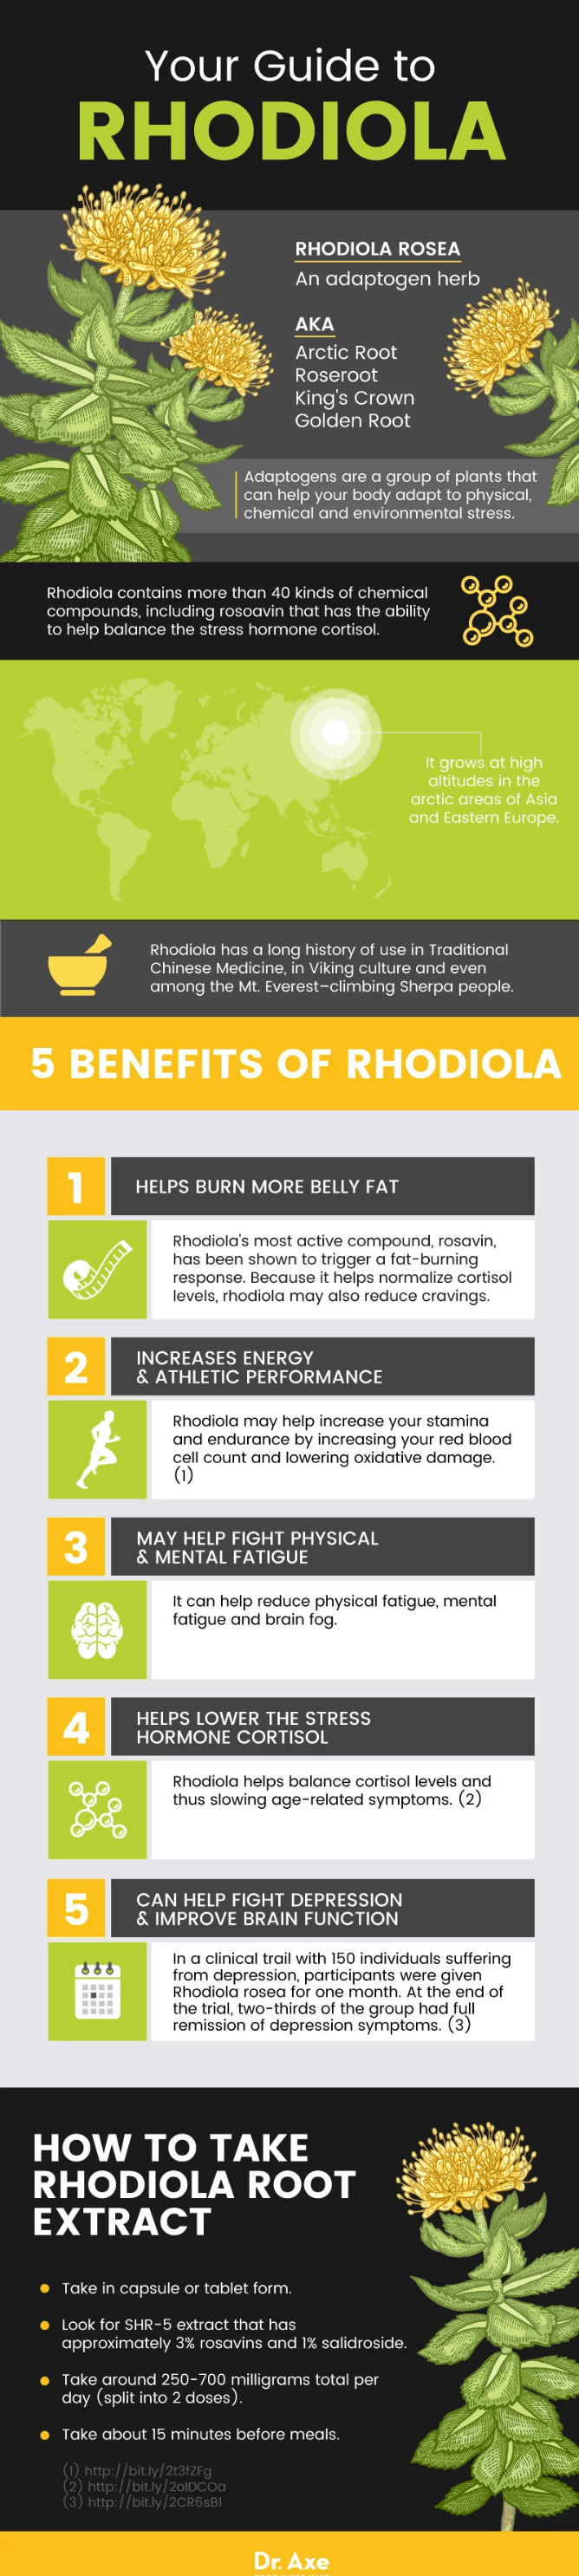 Rhodiola Benefits: Burning Fat for Energy, Beating Depression + More